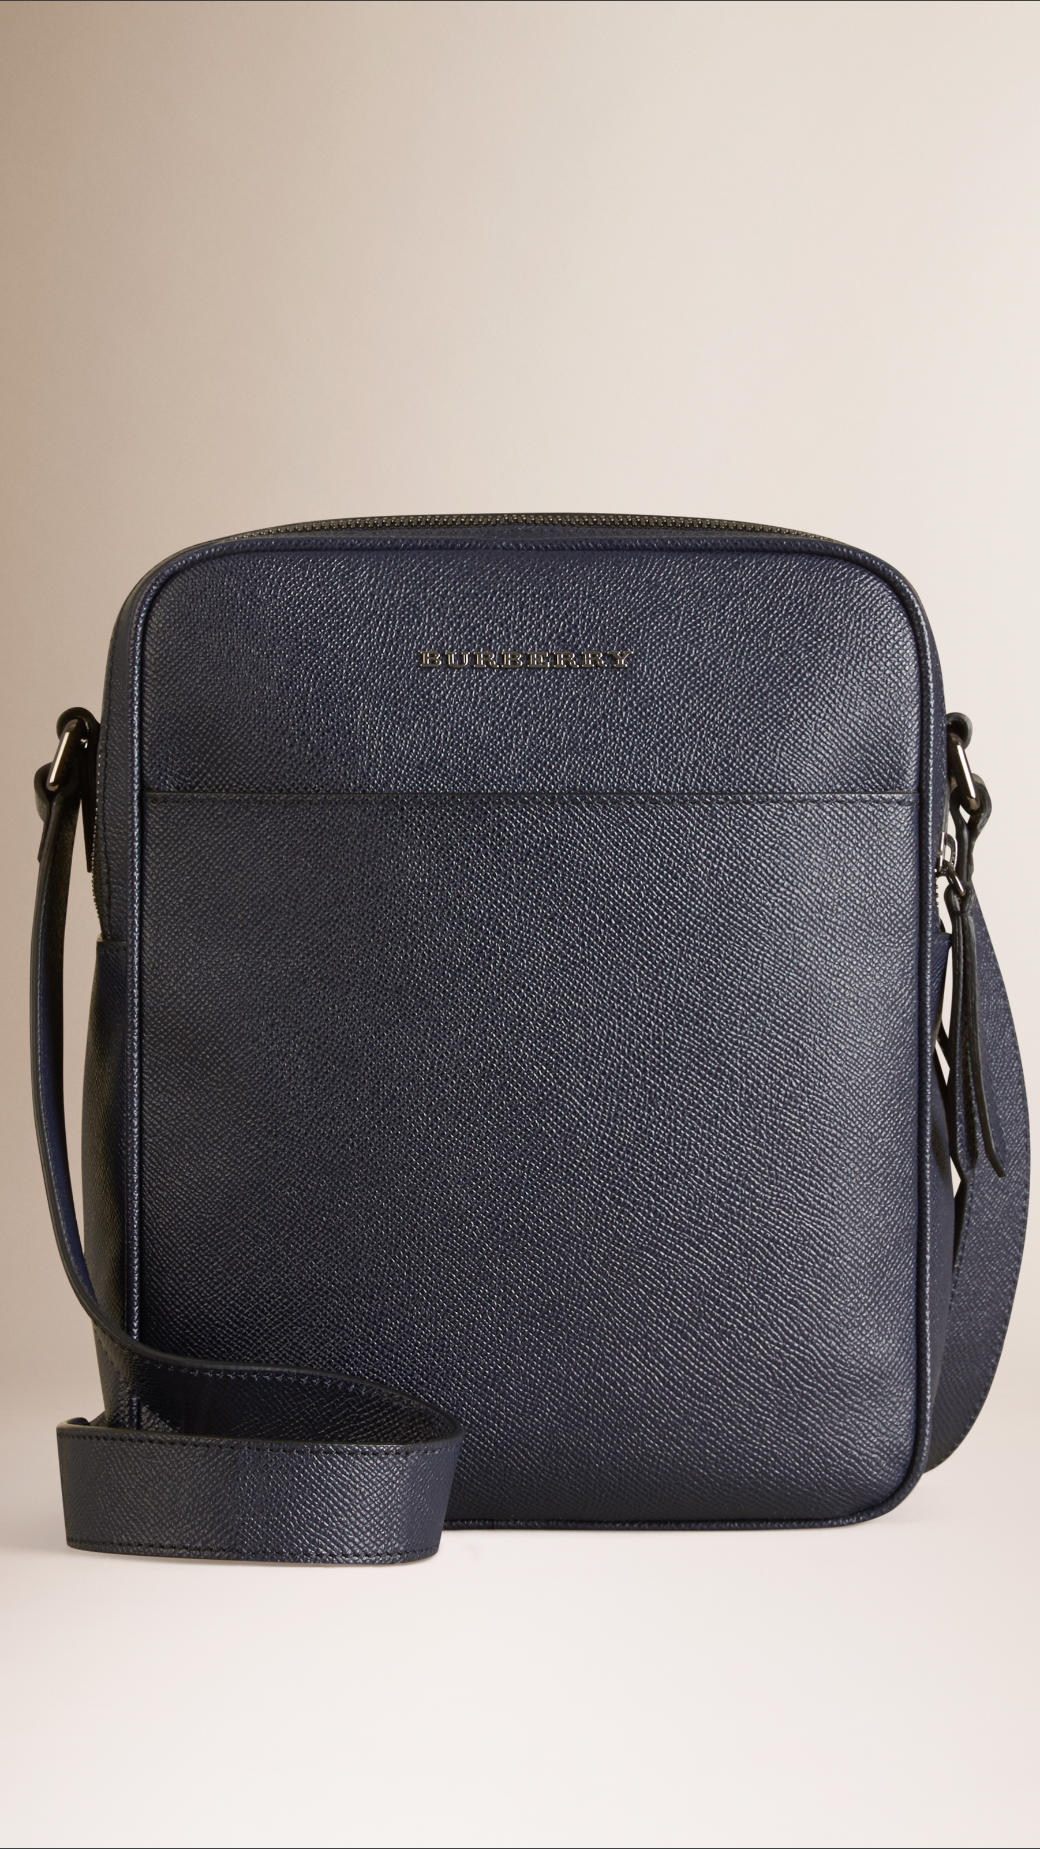 Lyst - Burberry London Leather Crossbody Bag in Blue for Men